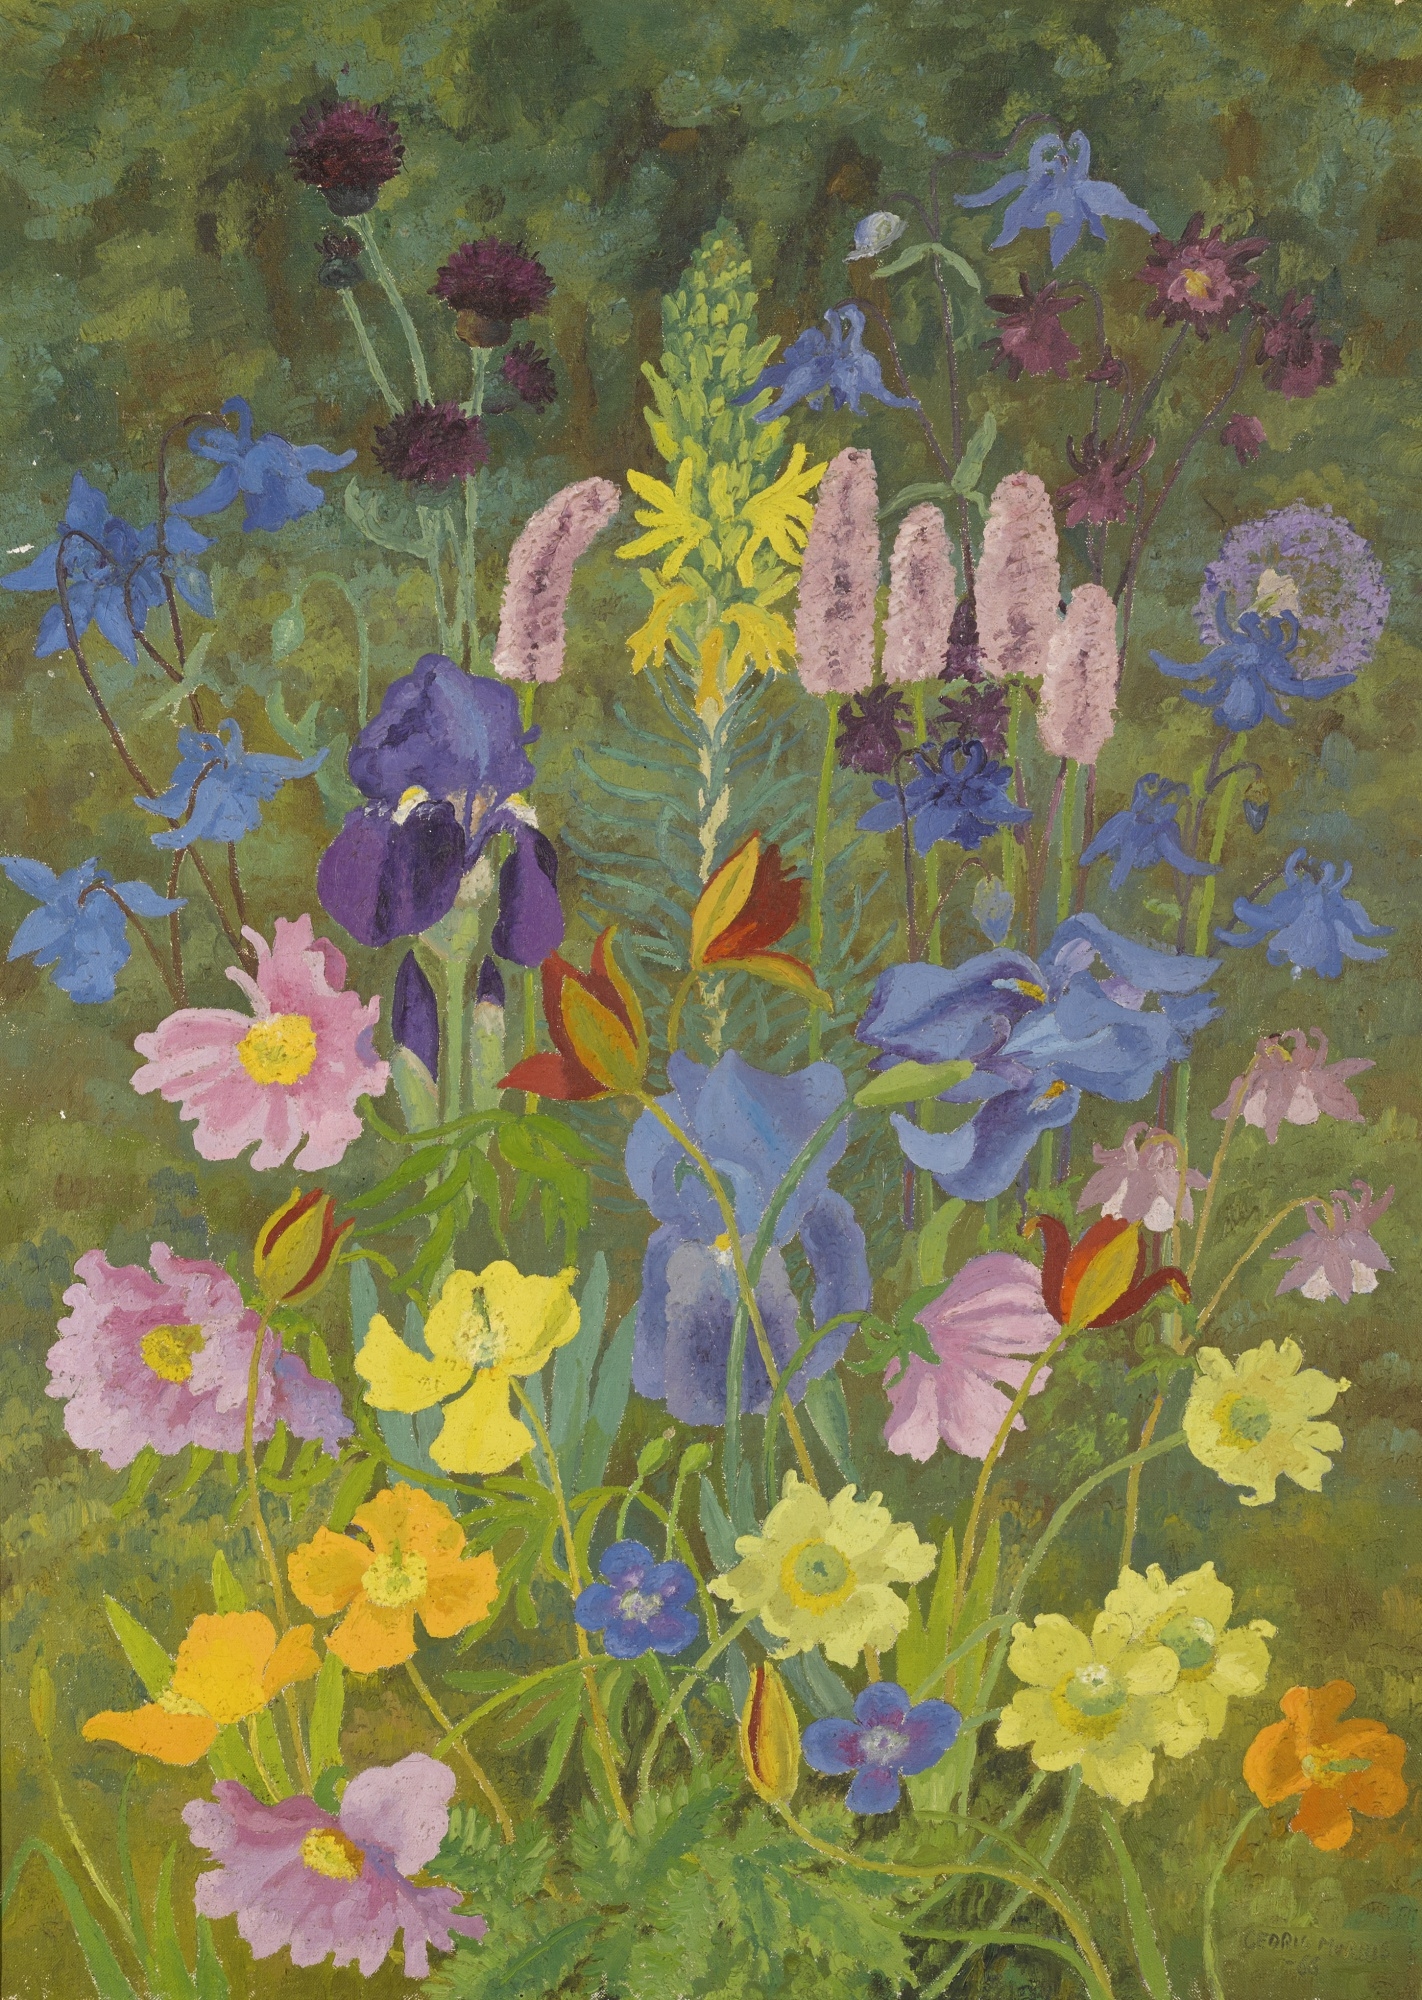 Artwork by Sir Cedric Morris, IRISES, ANEMONES, CARNATIONS, AQUILEGIA AND WILD ORCHIDS, Made of oil on canvas